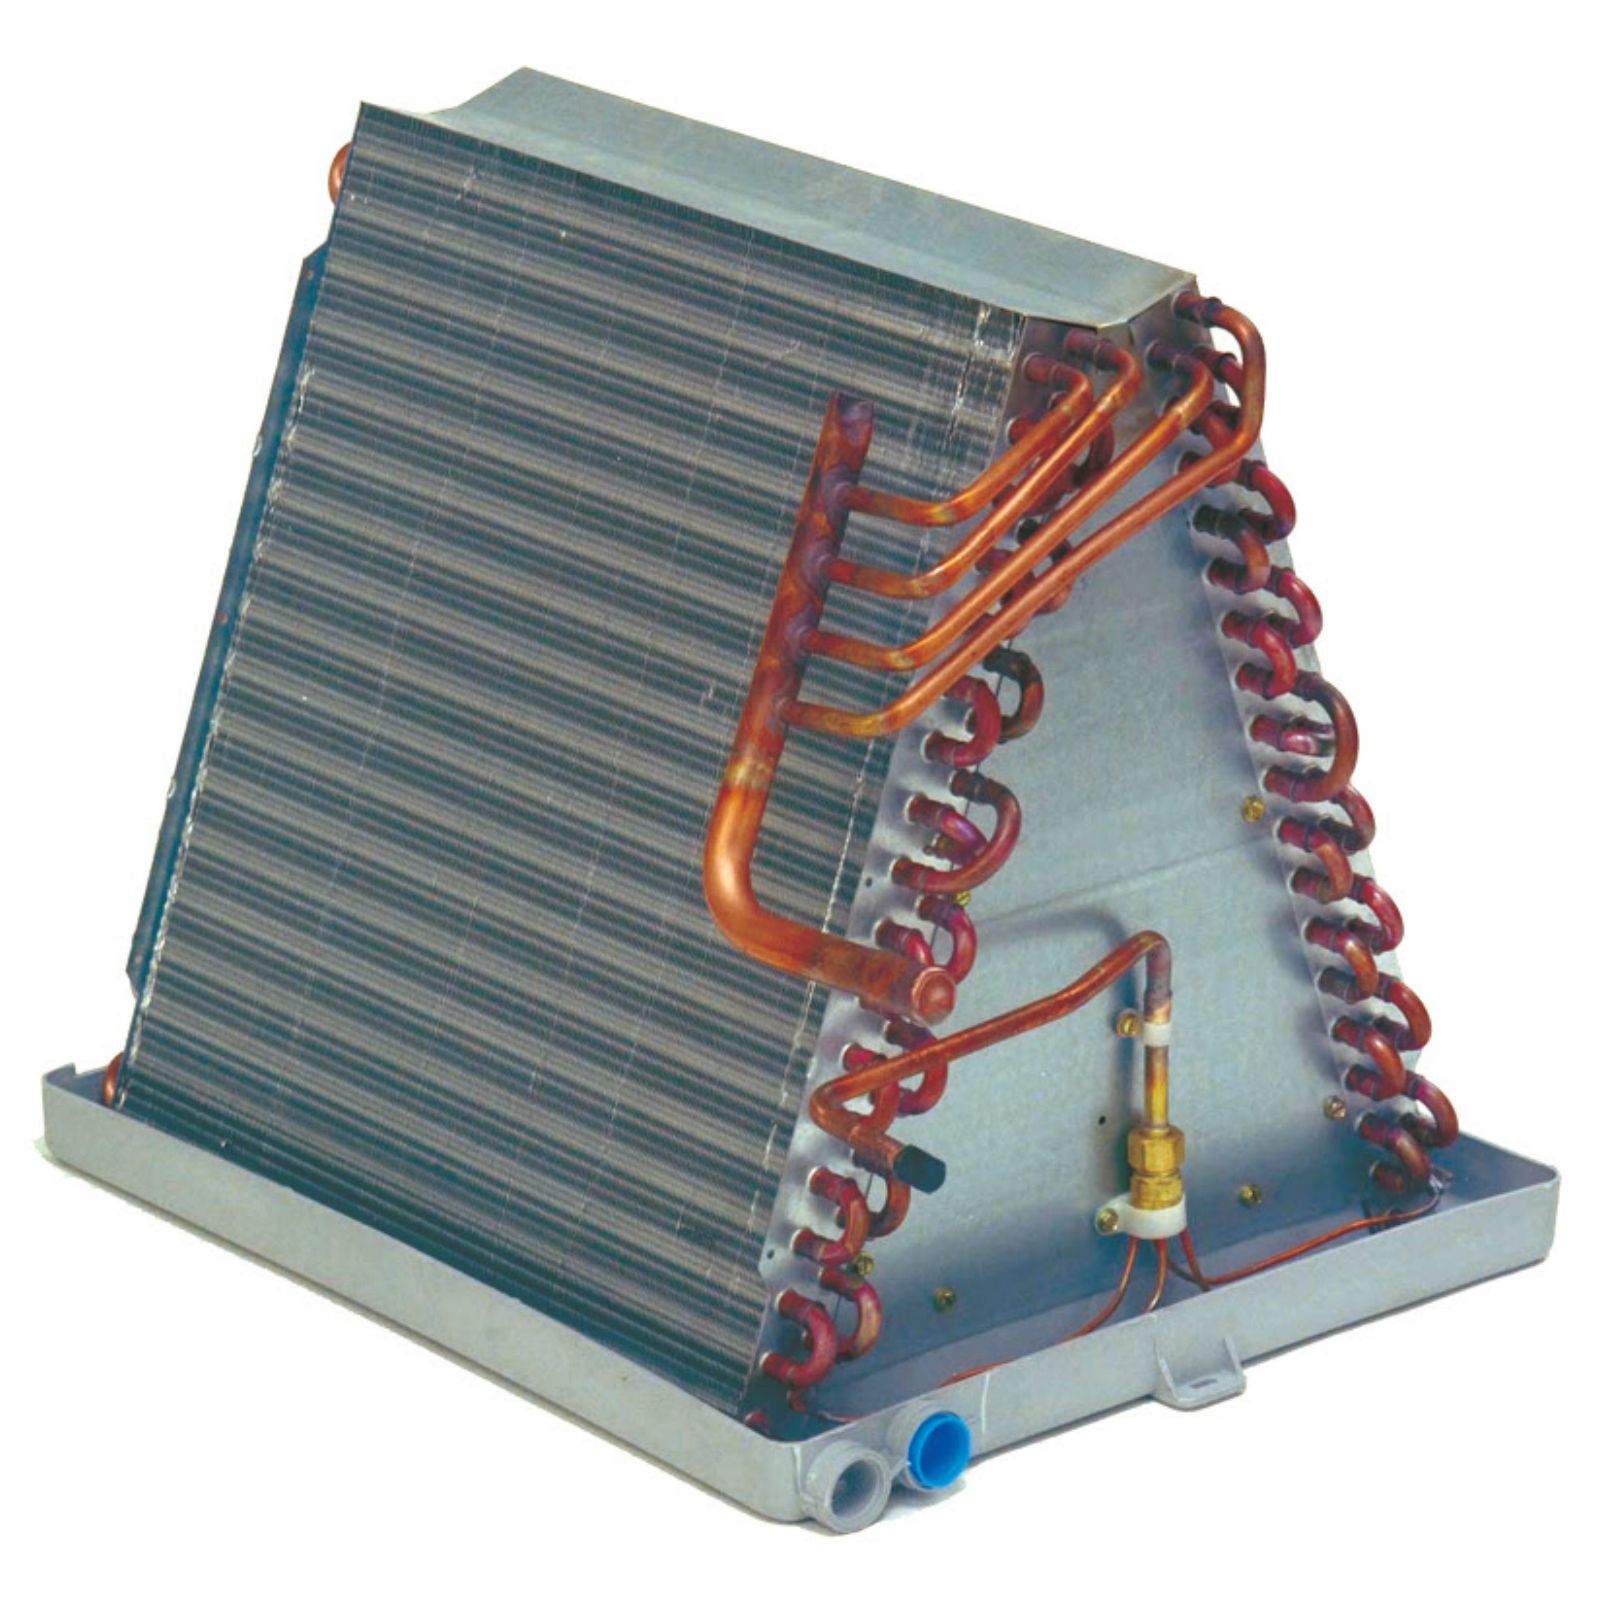 Tempstar EPA36F19WT - 3 Ton, R22, Uncased, A Type Piston Replacement Evaporator Coil, 18 1/8" Drain Pan (for 15.5" Cabinet)